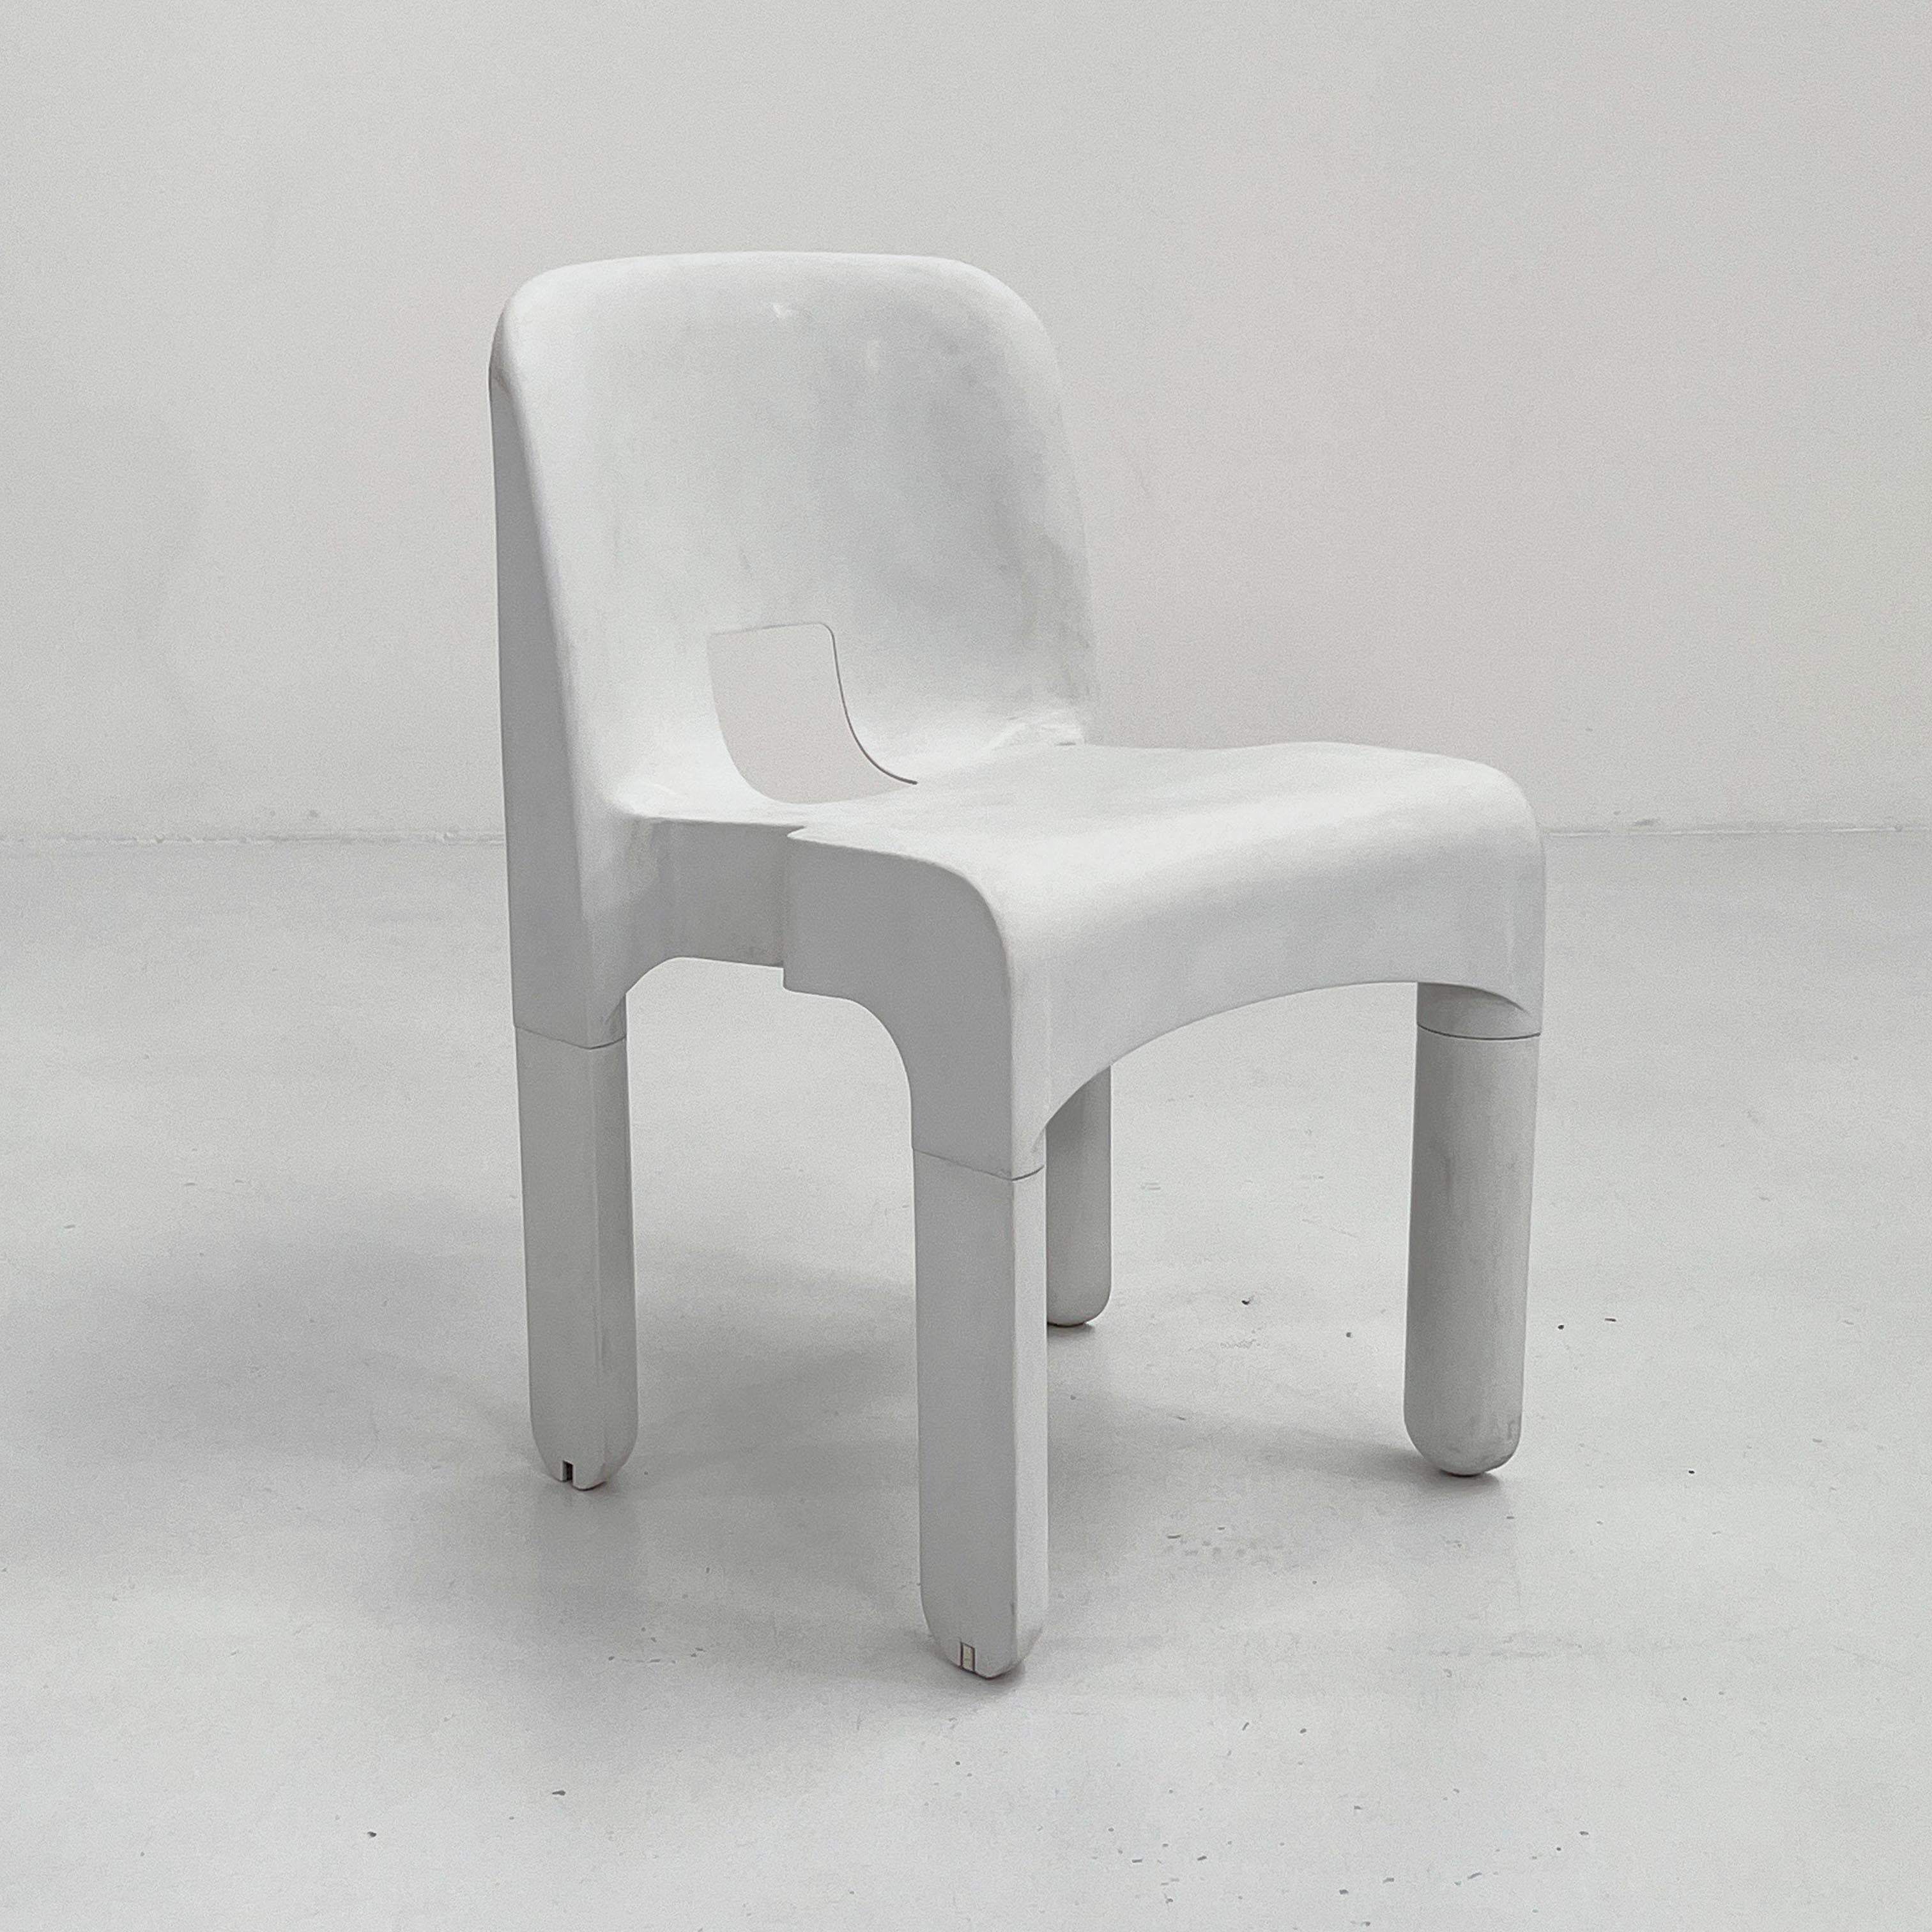 White Model 4867 Universale chair by Joe Colombo for Kartell, 1970s
2 pieces available - Price is per piece
Designer - Joe Colombo
Producer - Kartell
Model - Universale Chair / Model 4867
Design Period - Seventies
Measurements - Width 44 cm x